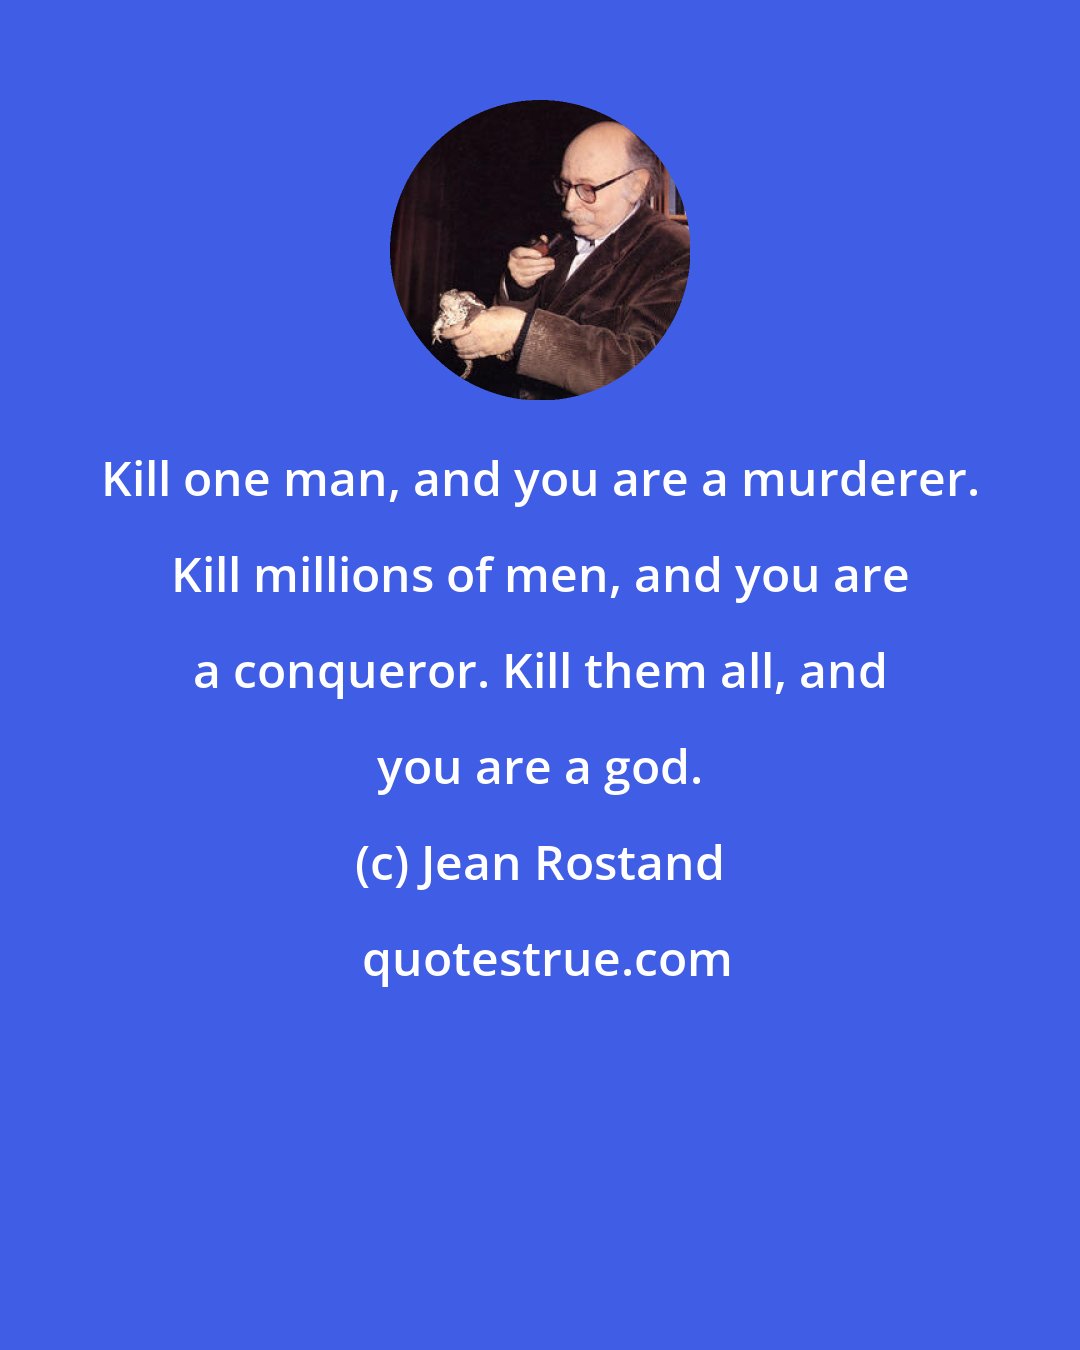 Jean Rostand: Kill one man, and you are a murderer. Kill millions of men, and you are a conqueror. Kill them all, and you are a god.